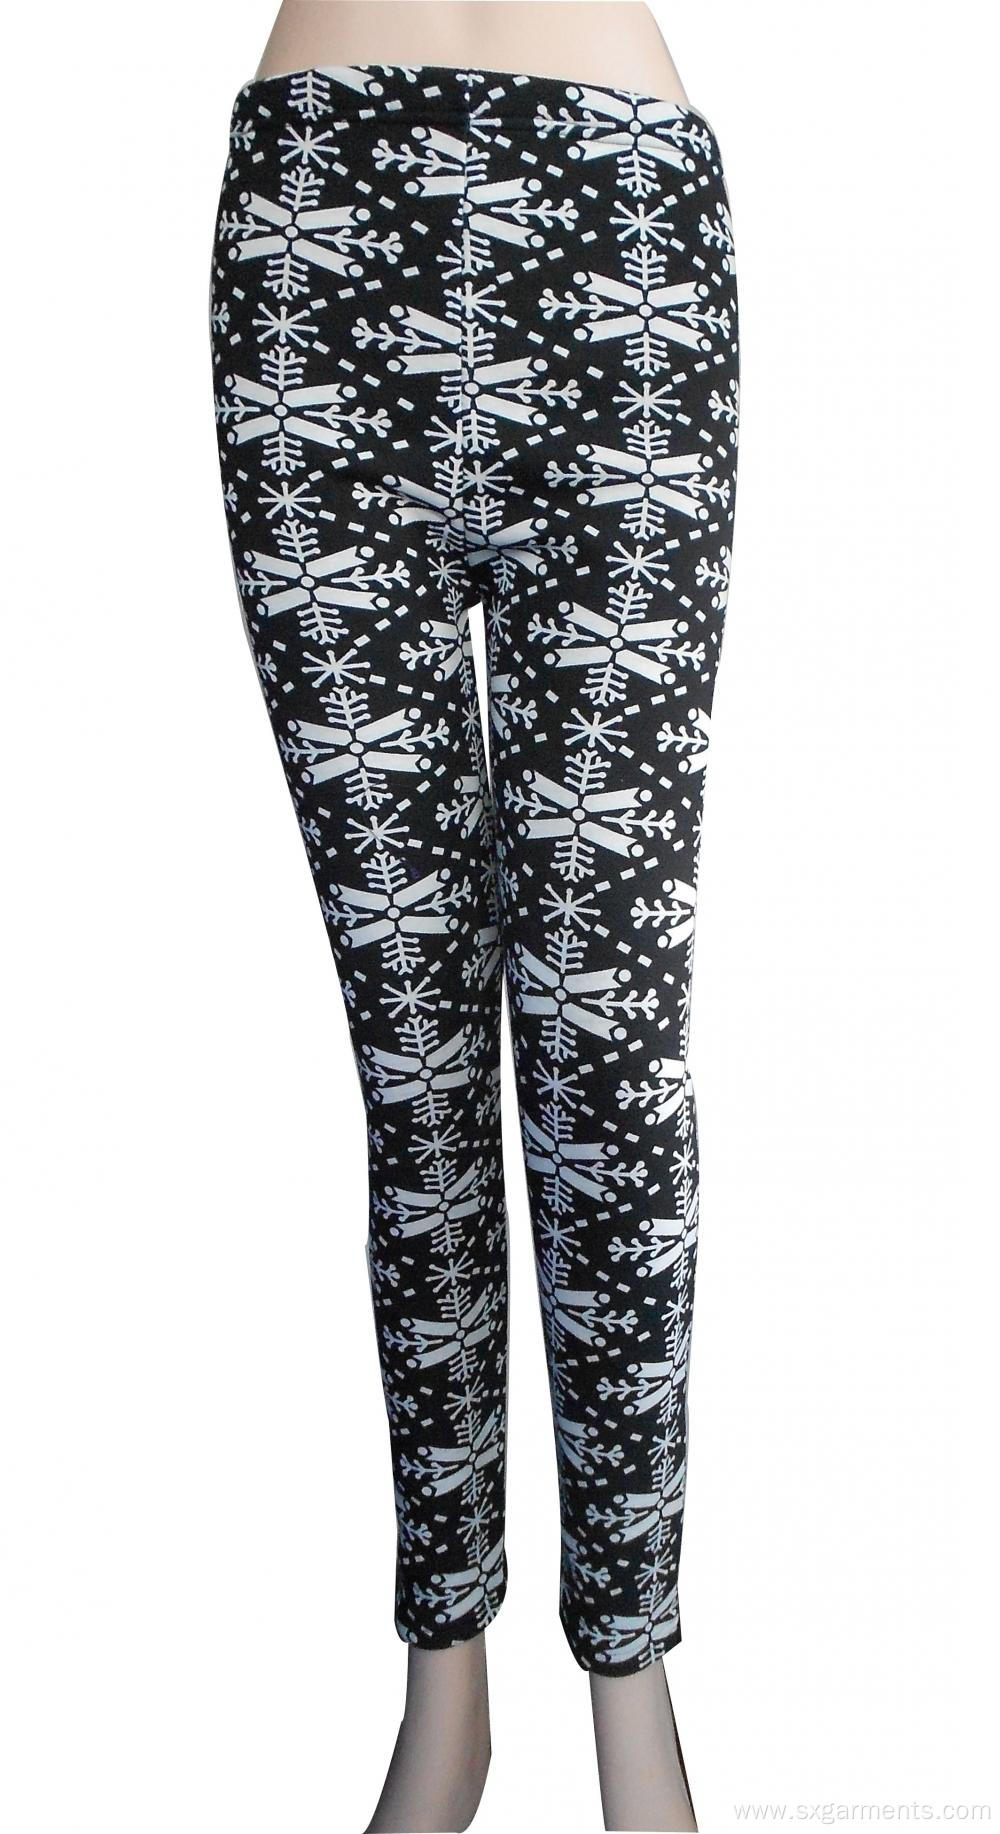 Top quality 98% polyester 2% spandex lady's leggings